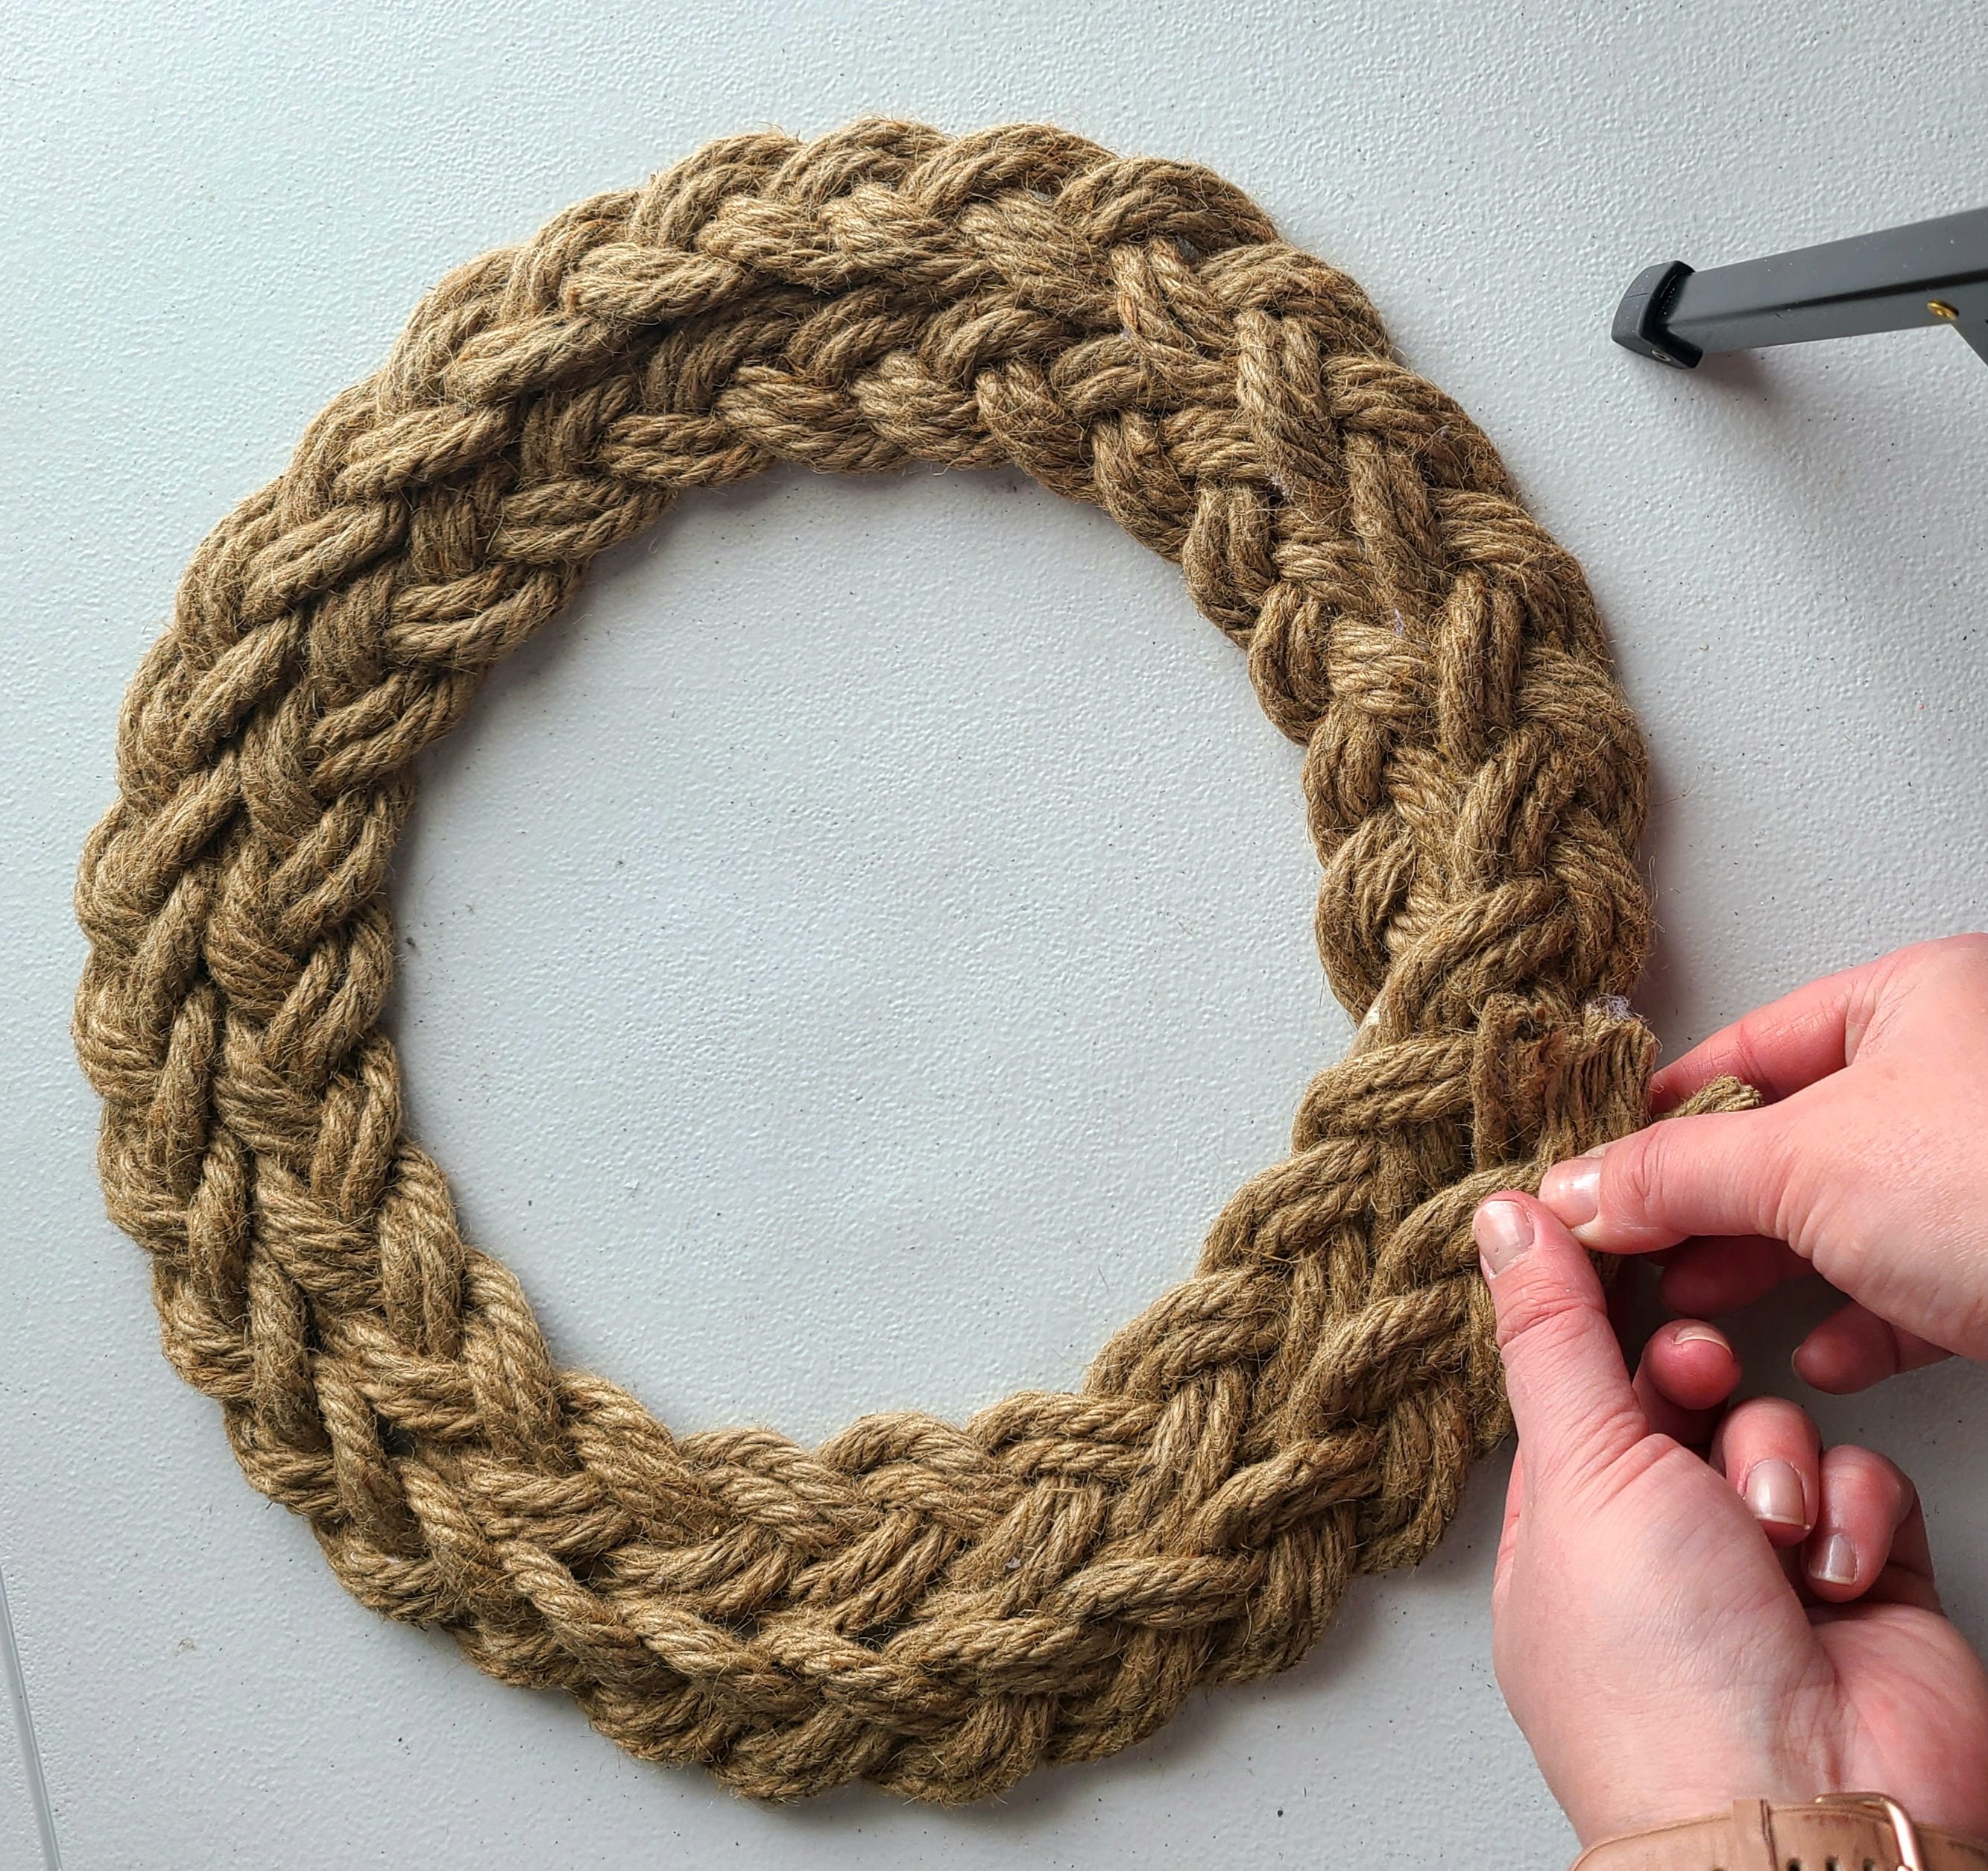 Gluing the end of the rope braid to the nautical wreath to finish it off.